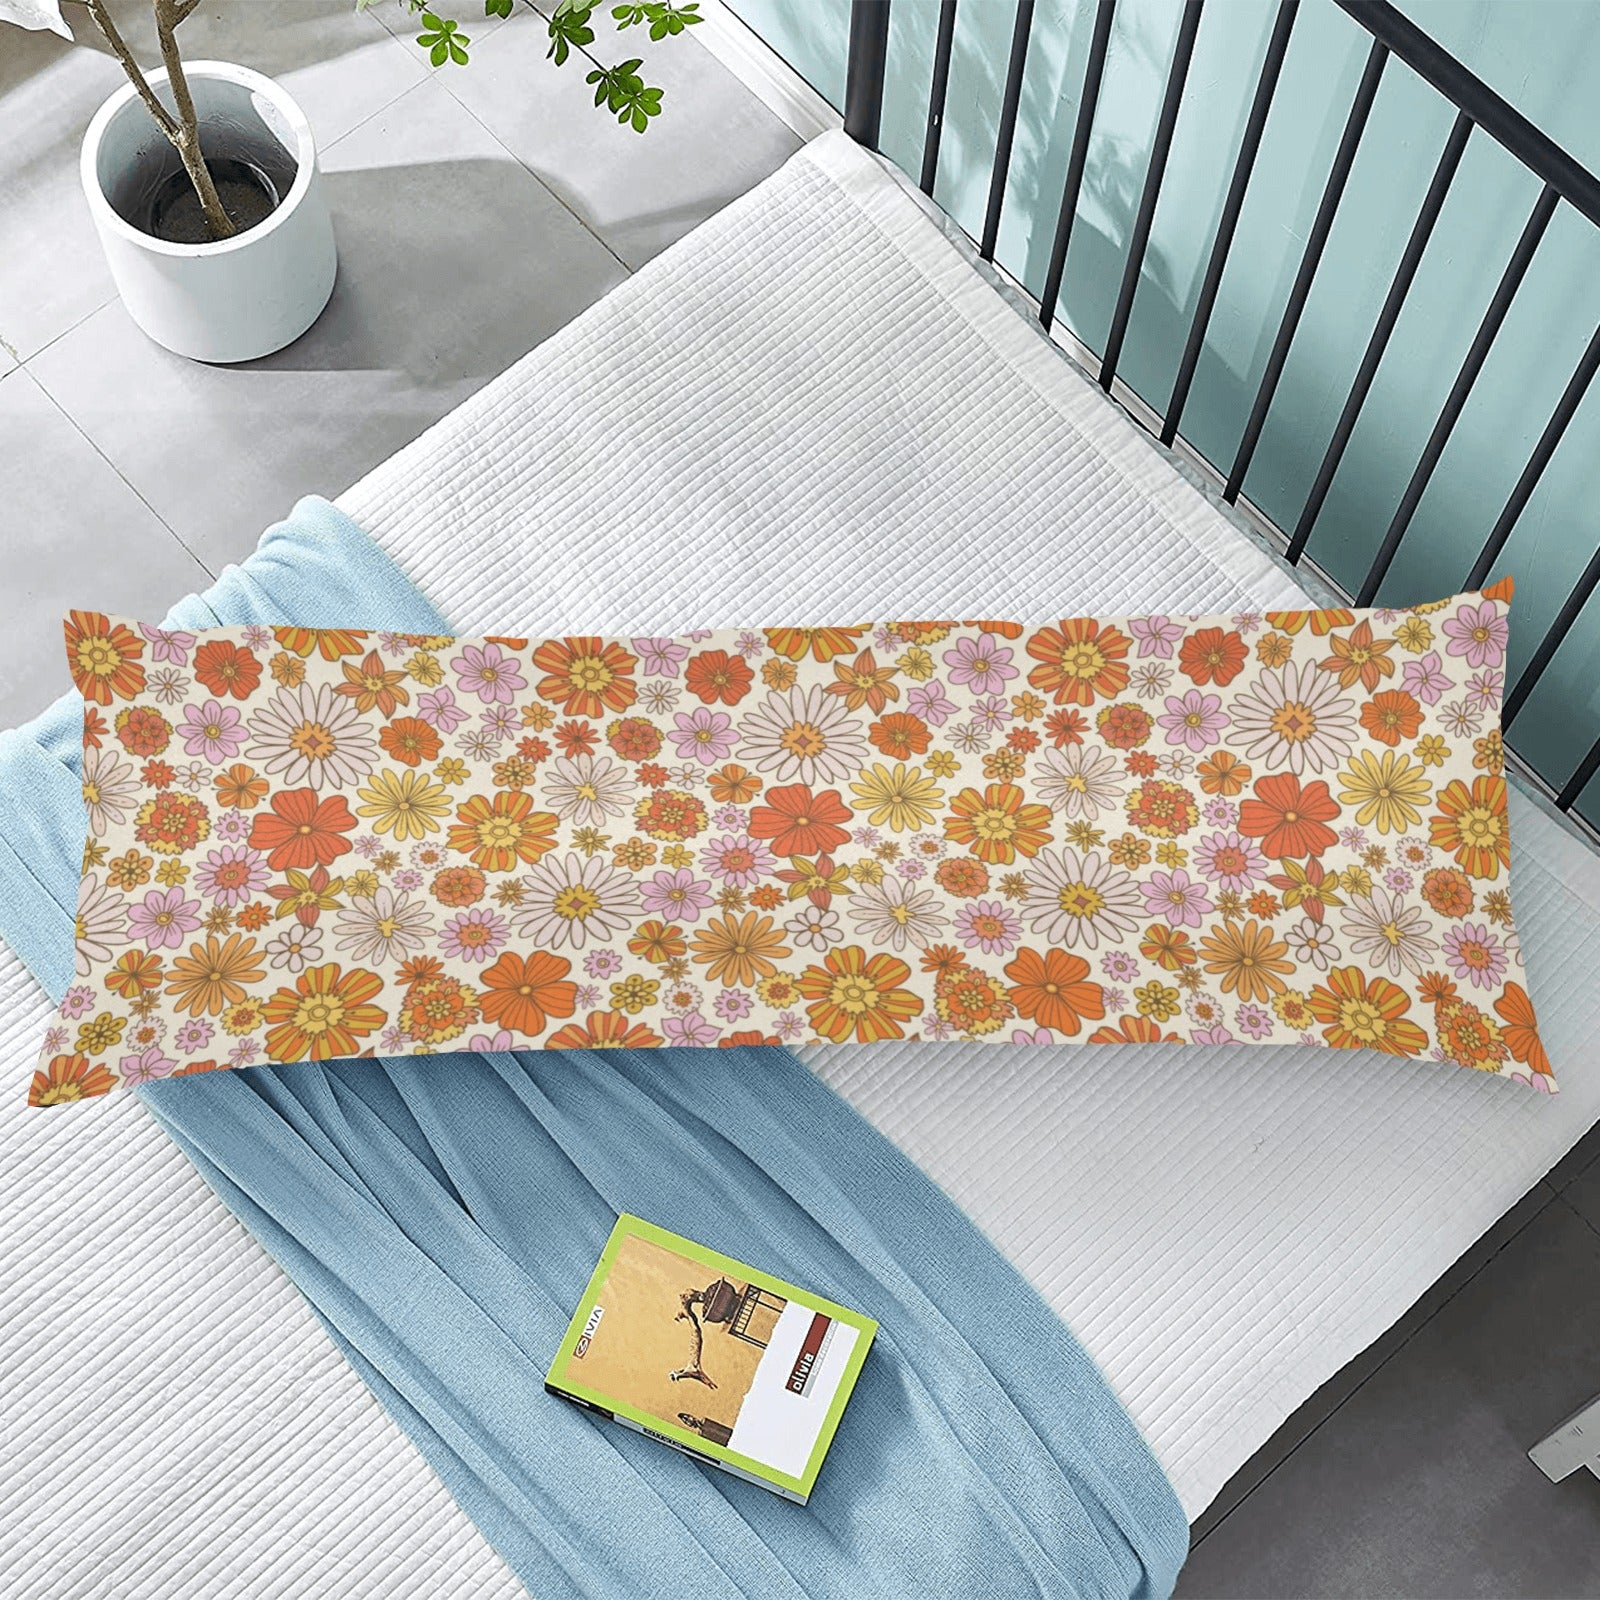 Groovy flowers Body Pillow Case, Boho Retro 70s Floral Funky Orange Long Large Bed Accent Print Throw Decor Decorative Cover 20x54 Starcove Fashion